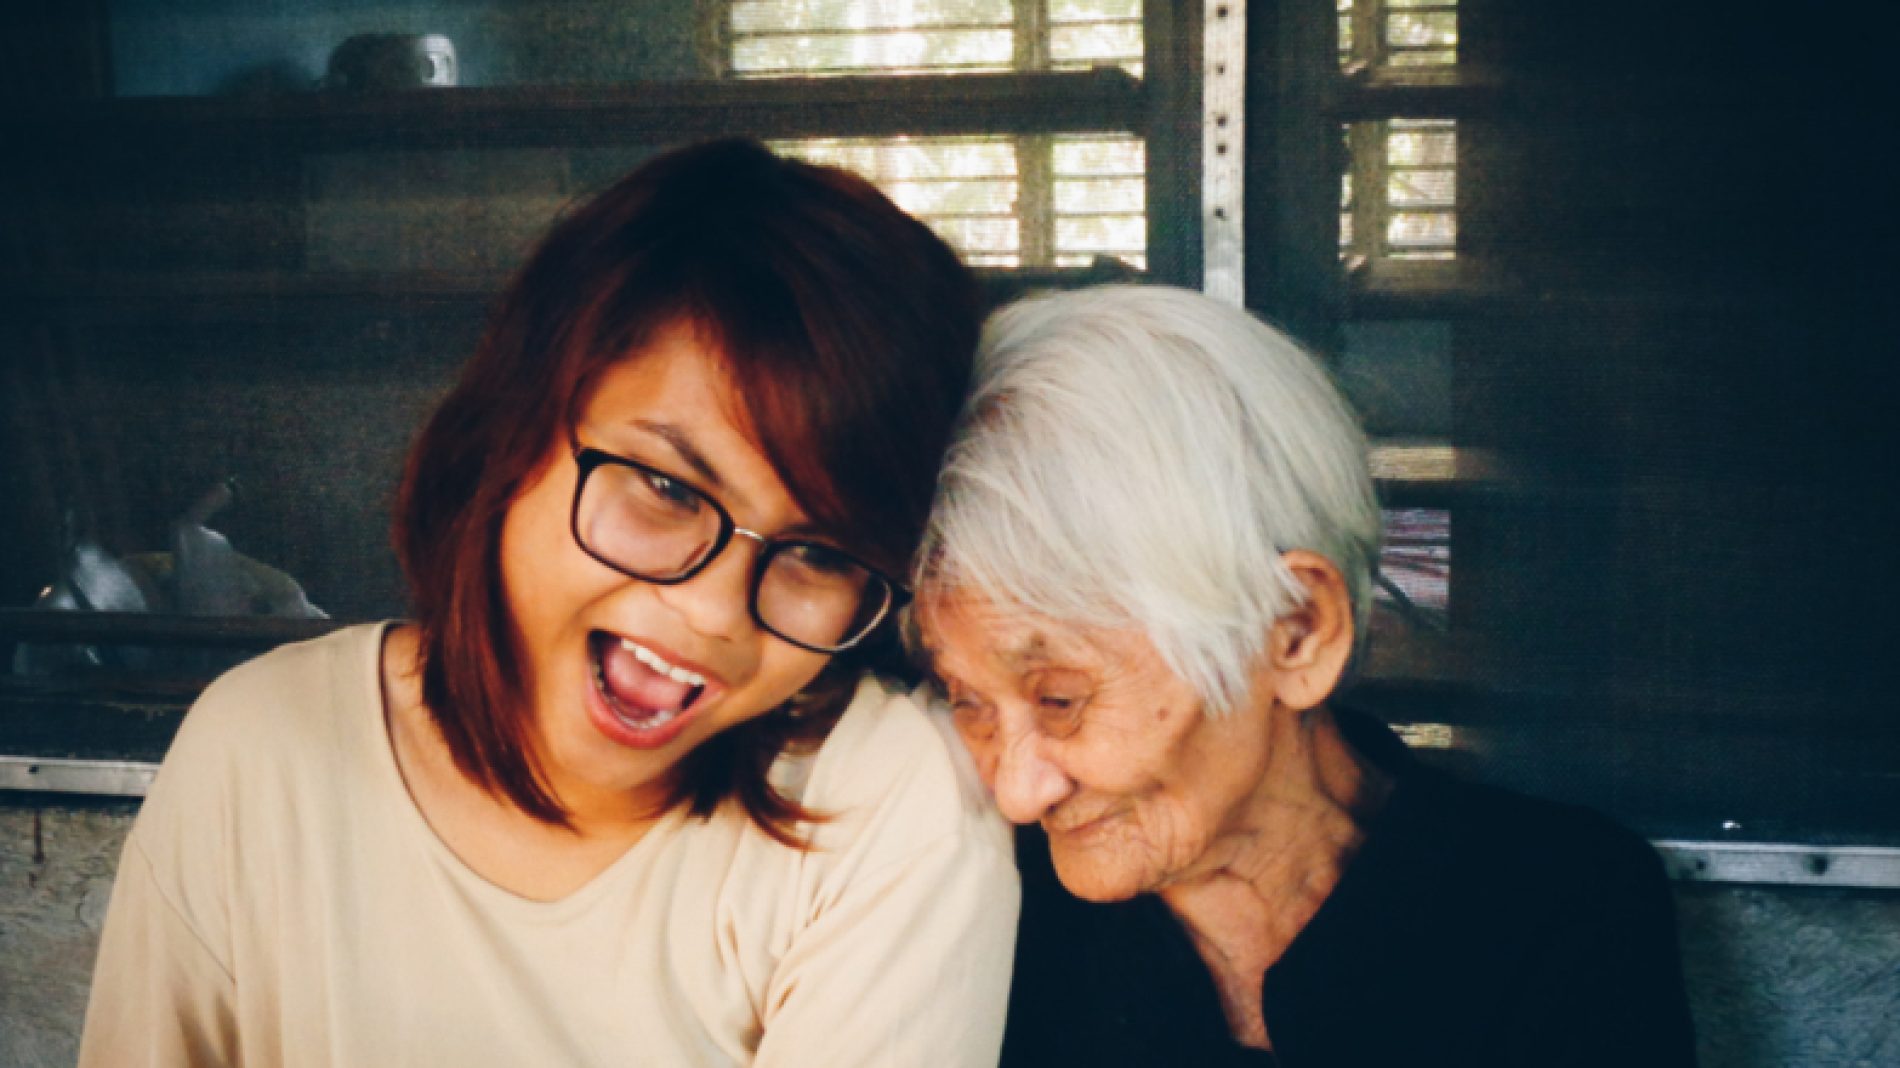 people-women-old-happiness-smiling-smile-smile-young-candid-grandmother-laughter-bff_t20_VoEdnl-sFCH6V